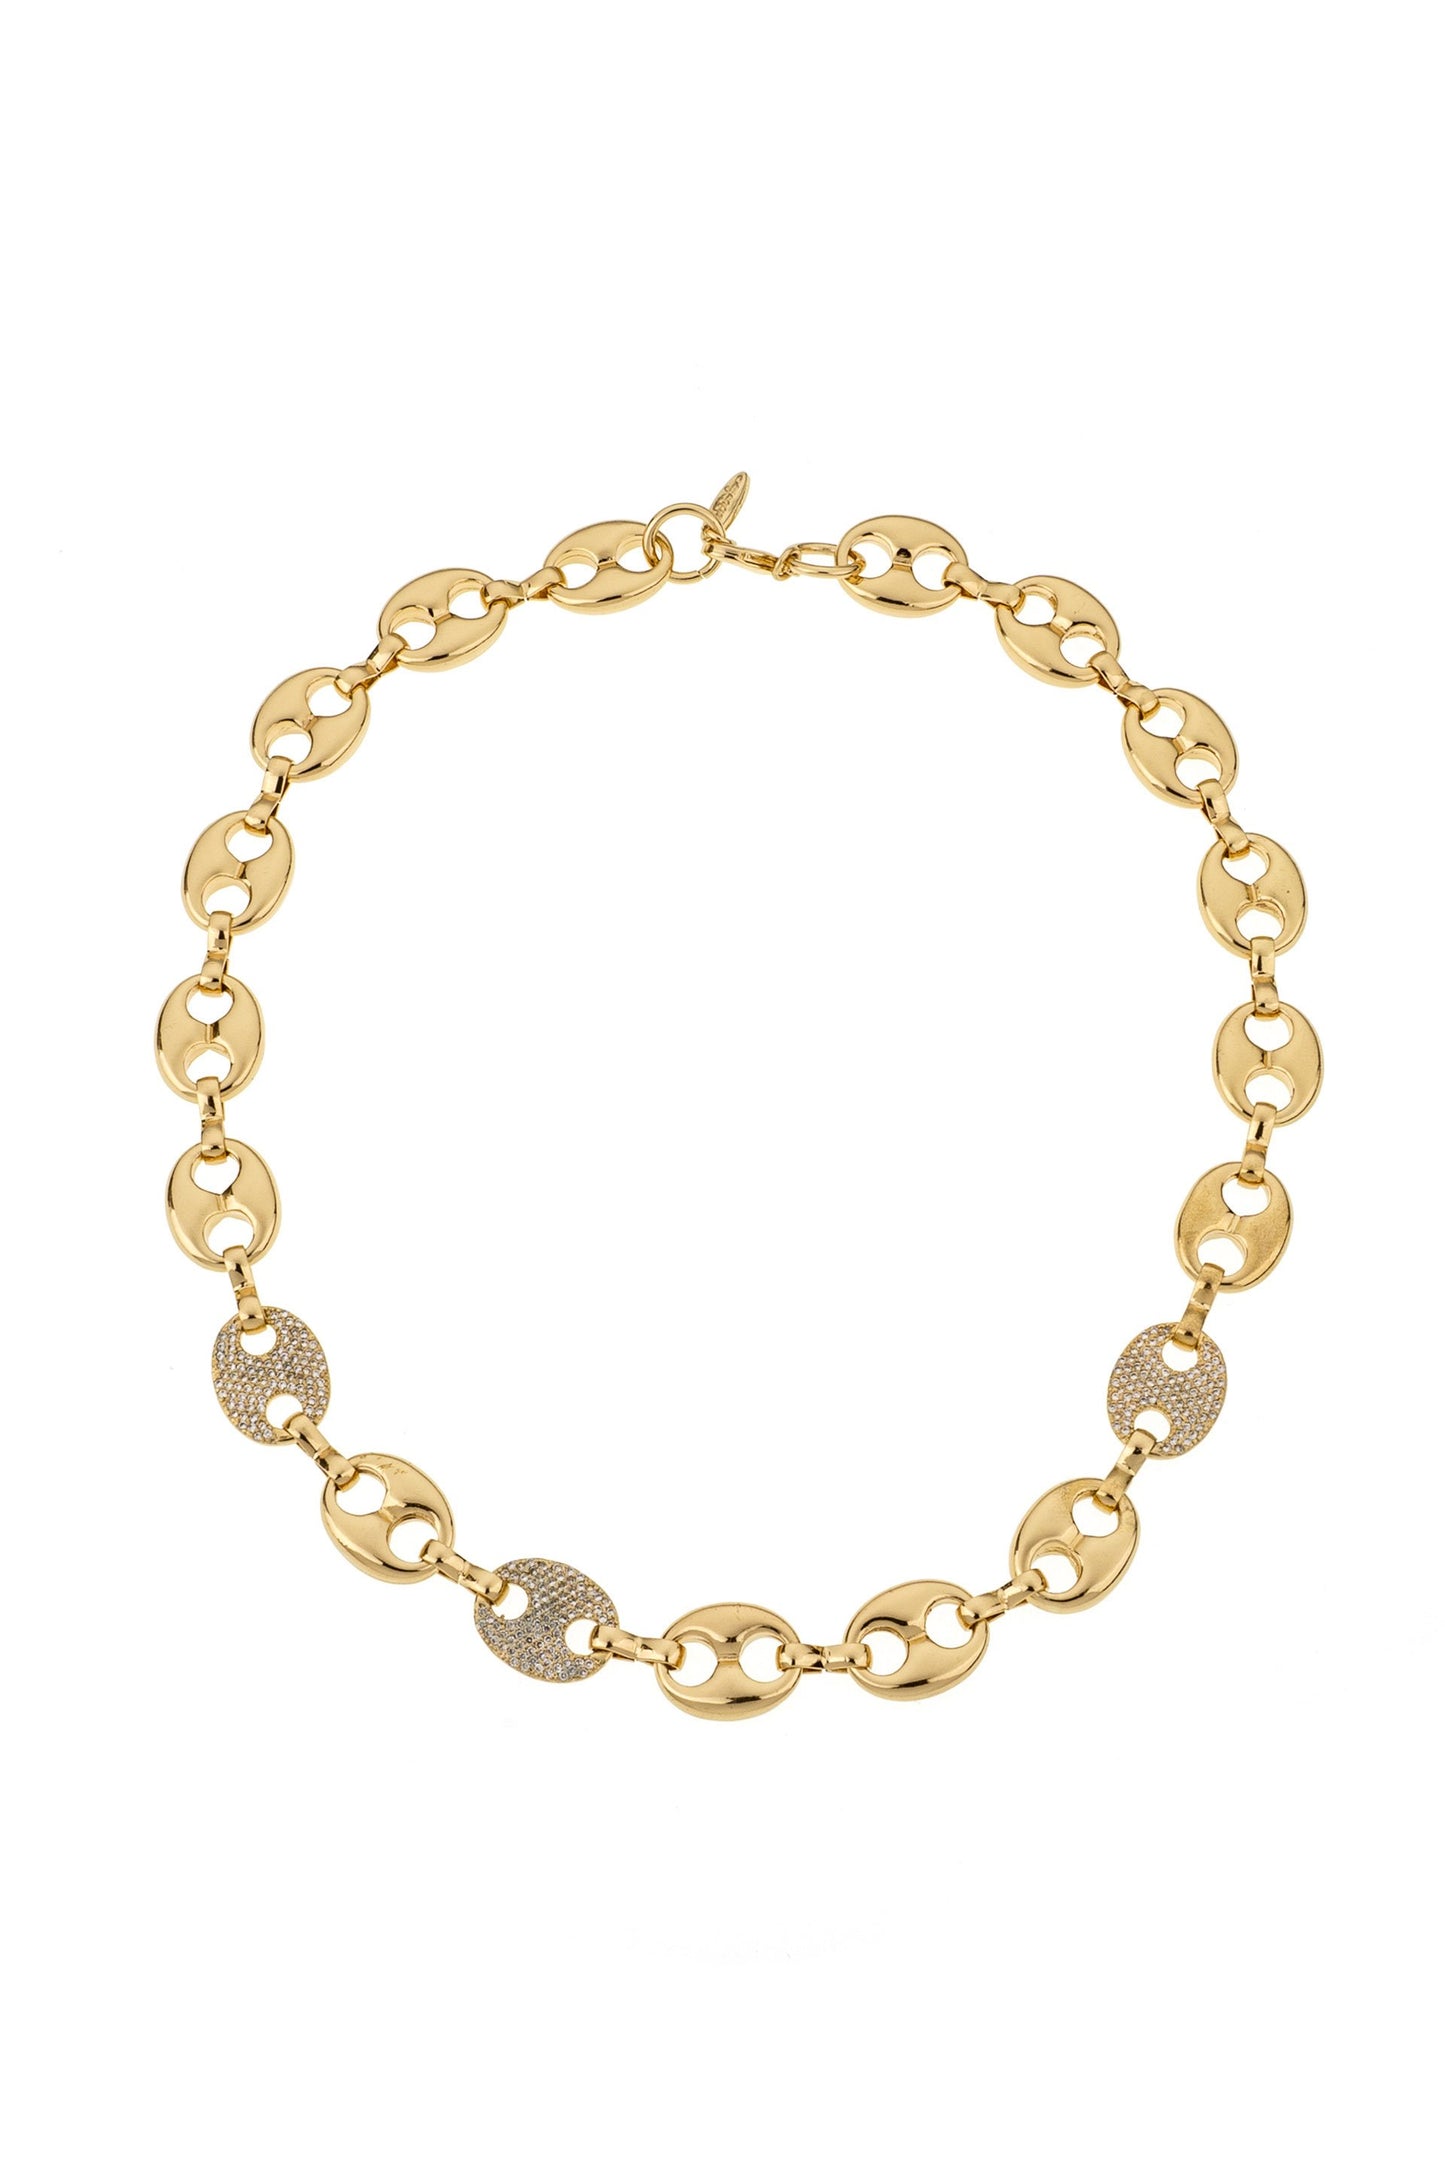 Modern Chains with Crystal Links Necklace in Gold on white